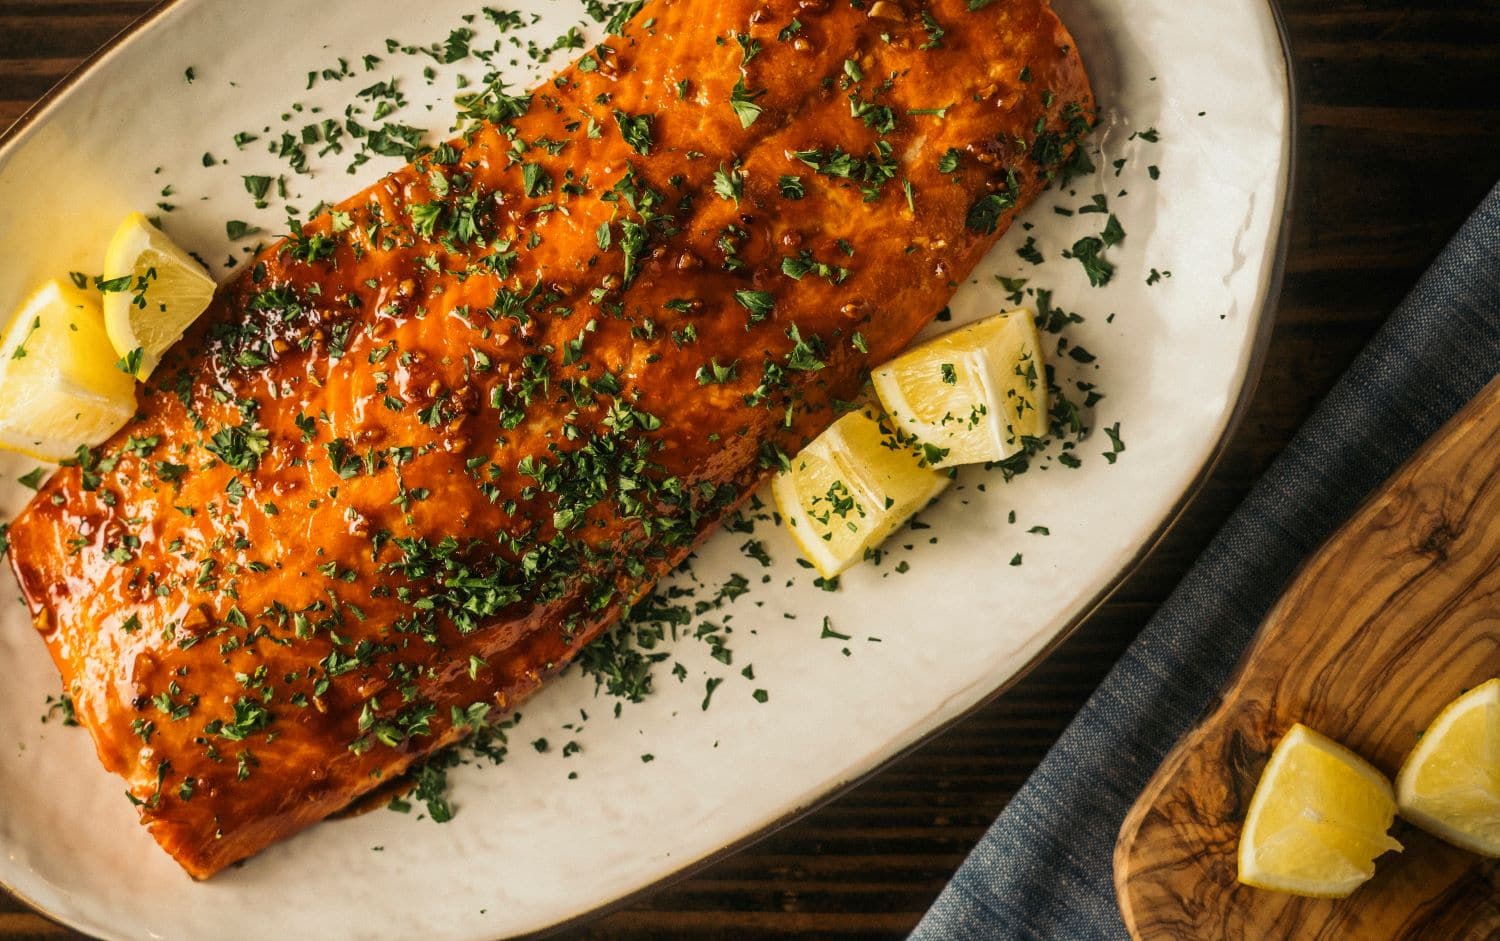 How To Grill Steelhead Trout Fillets